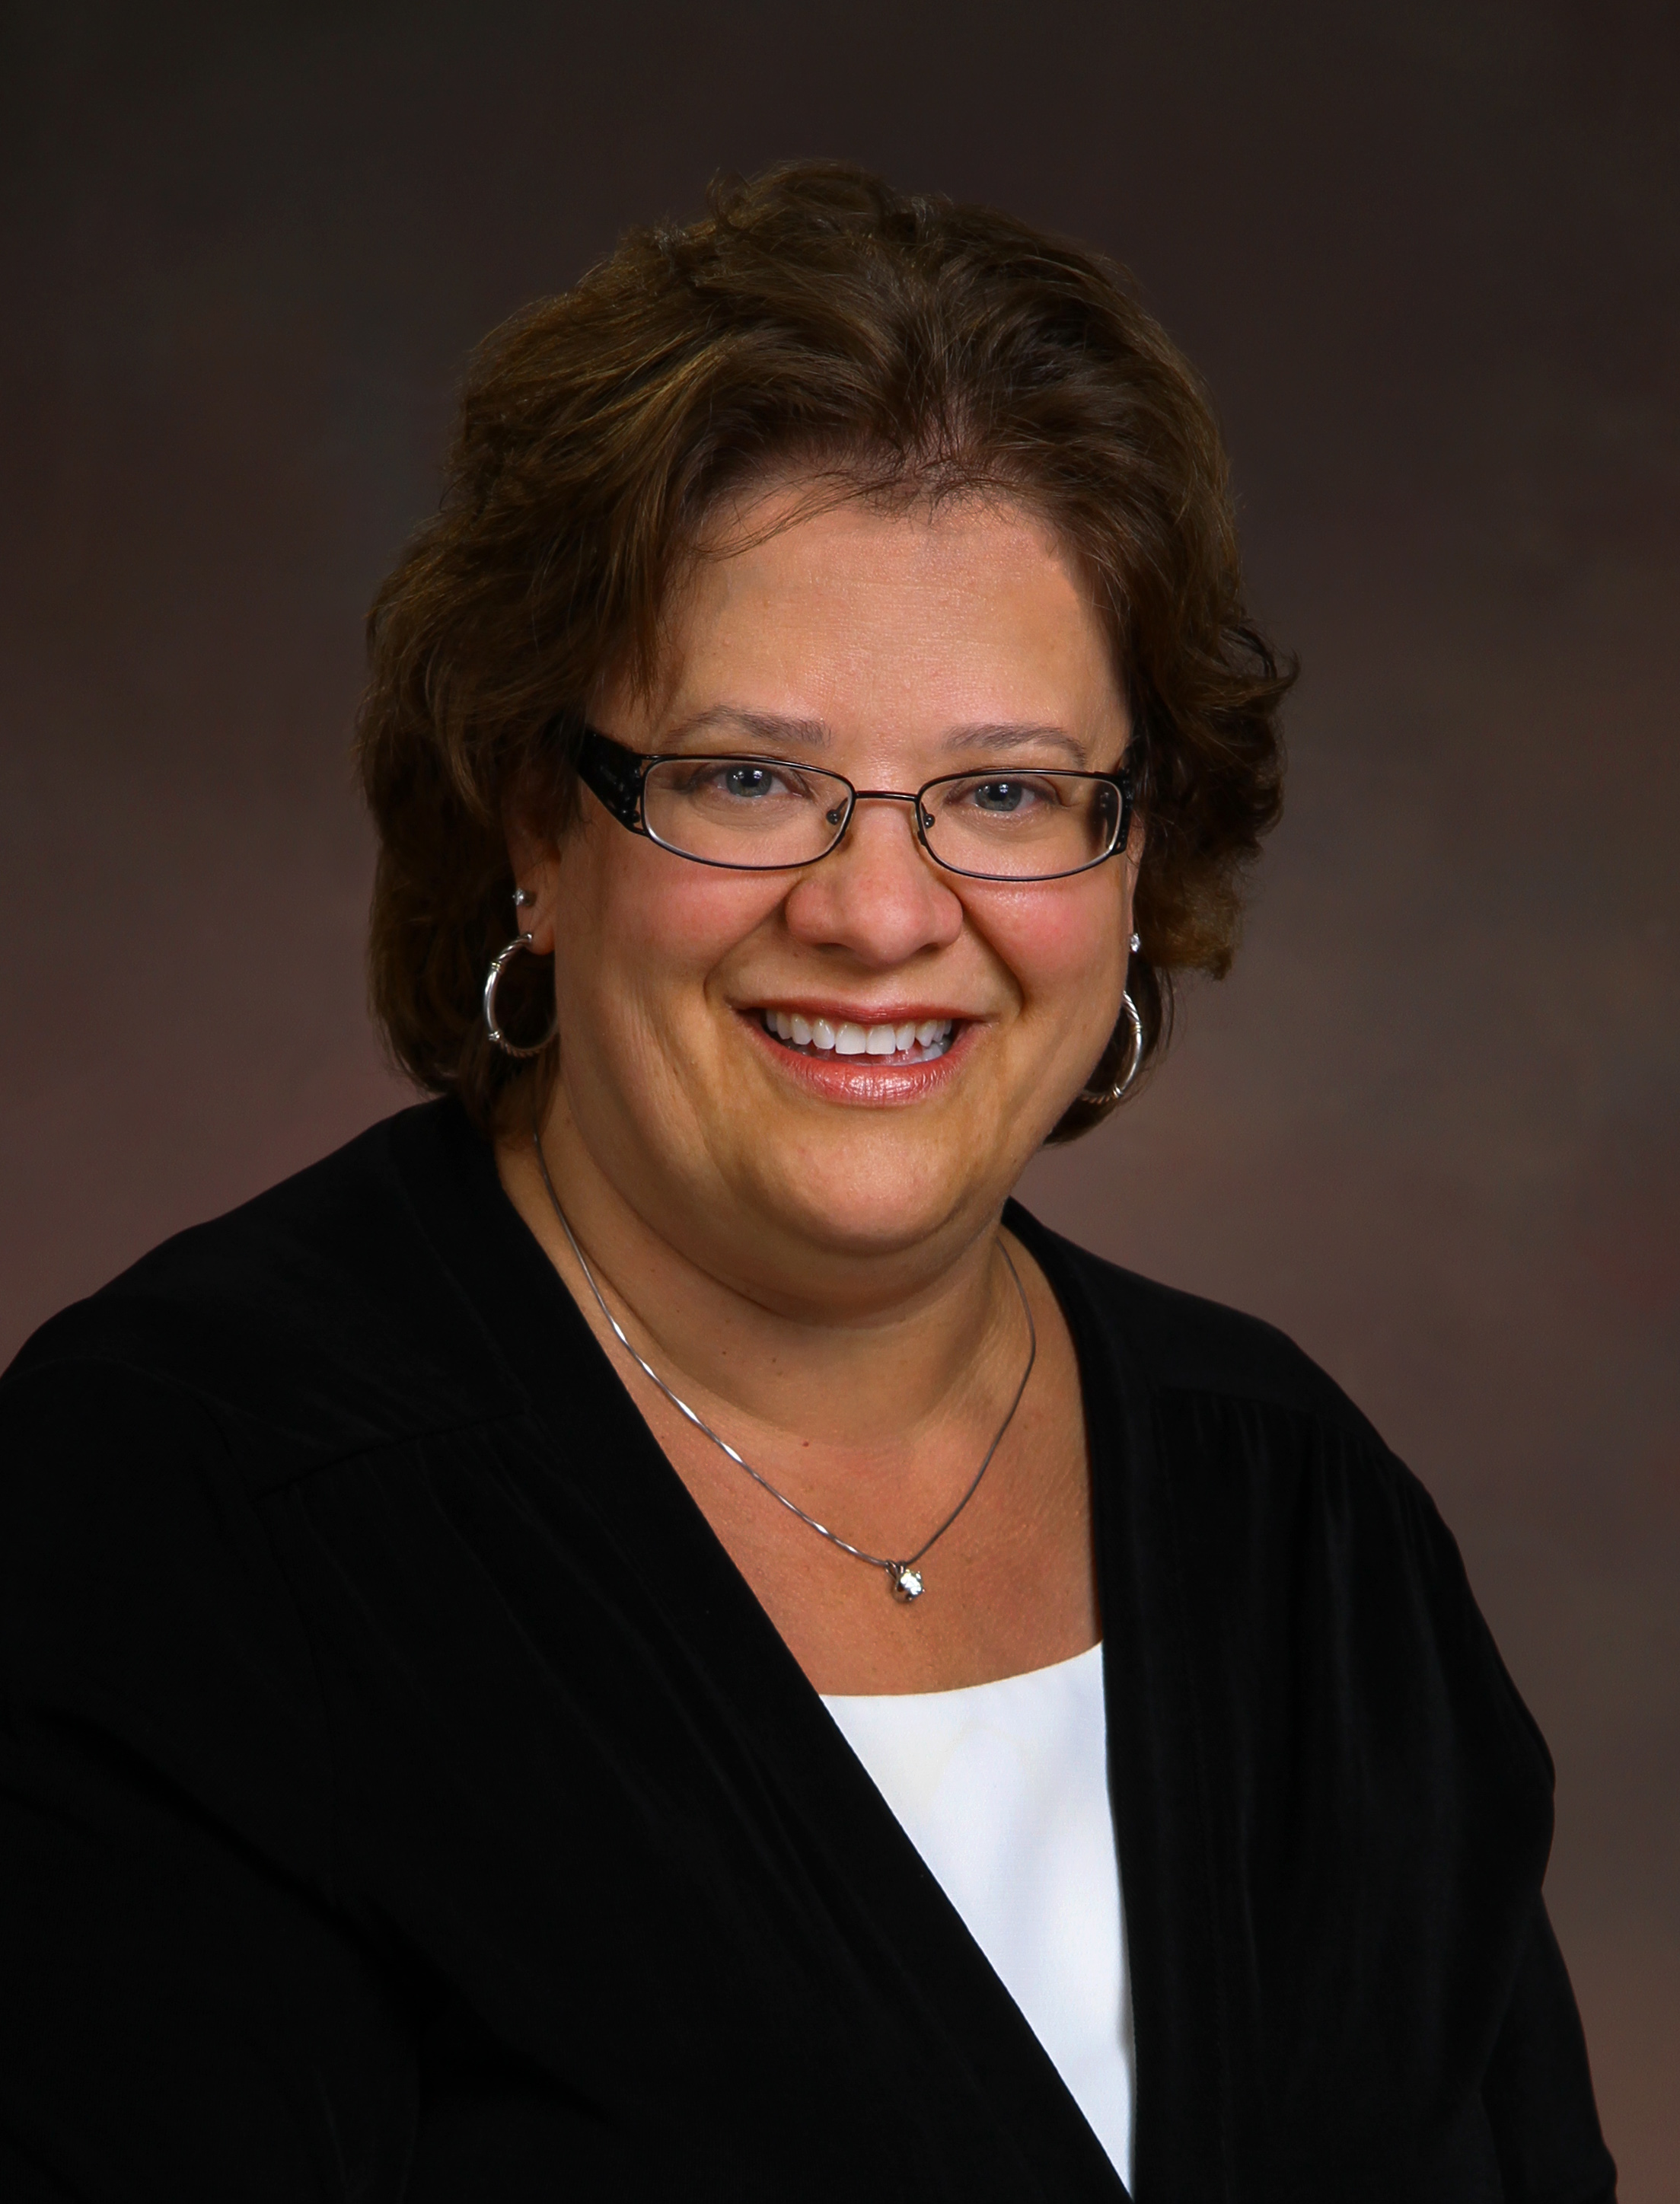 Lynne Coy-Ogan, Ed.D., is the senior vice president for academic affairs at Husson University.